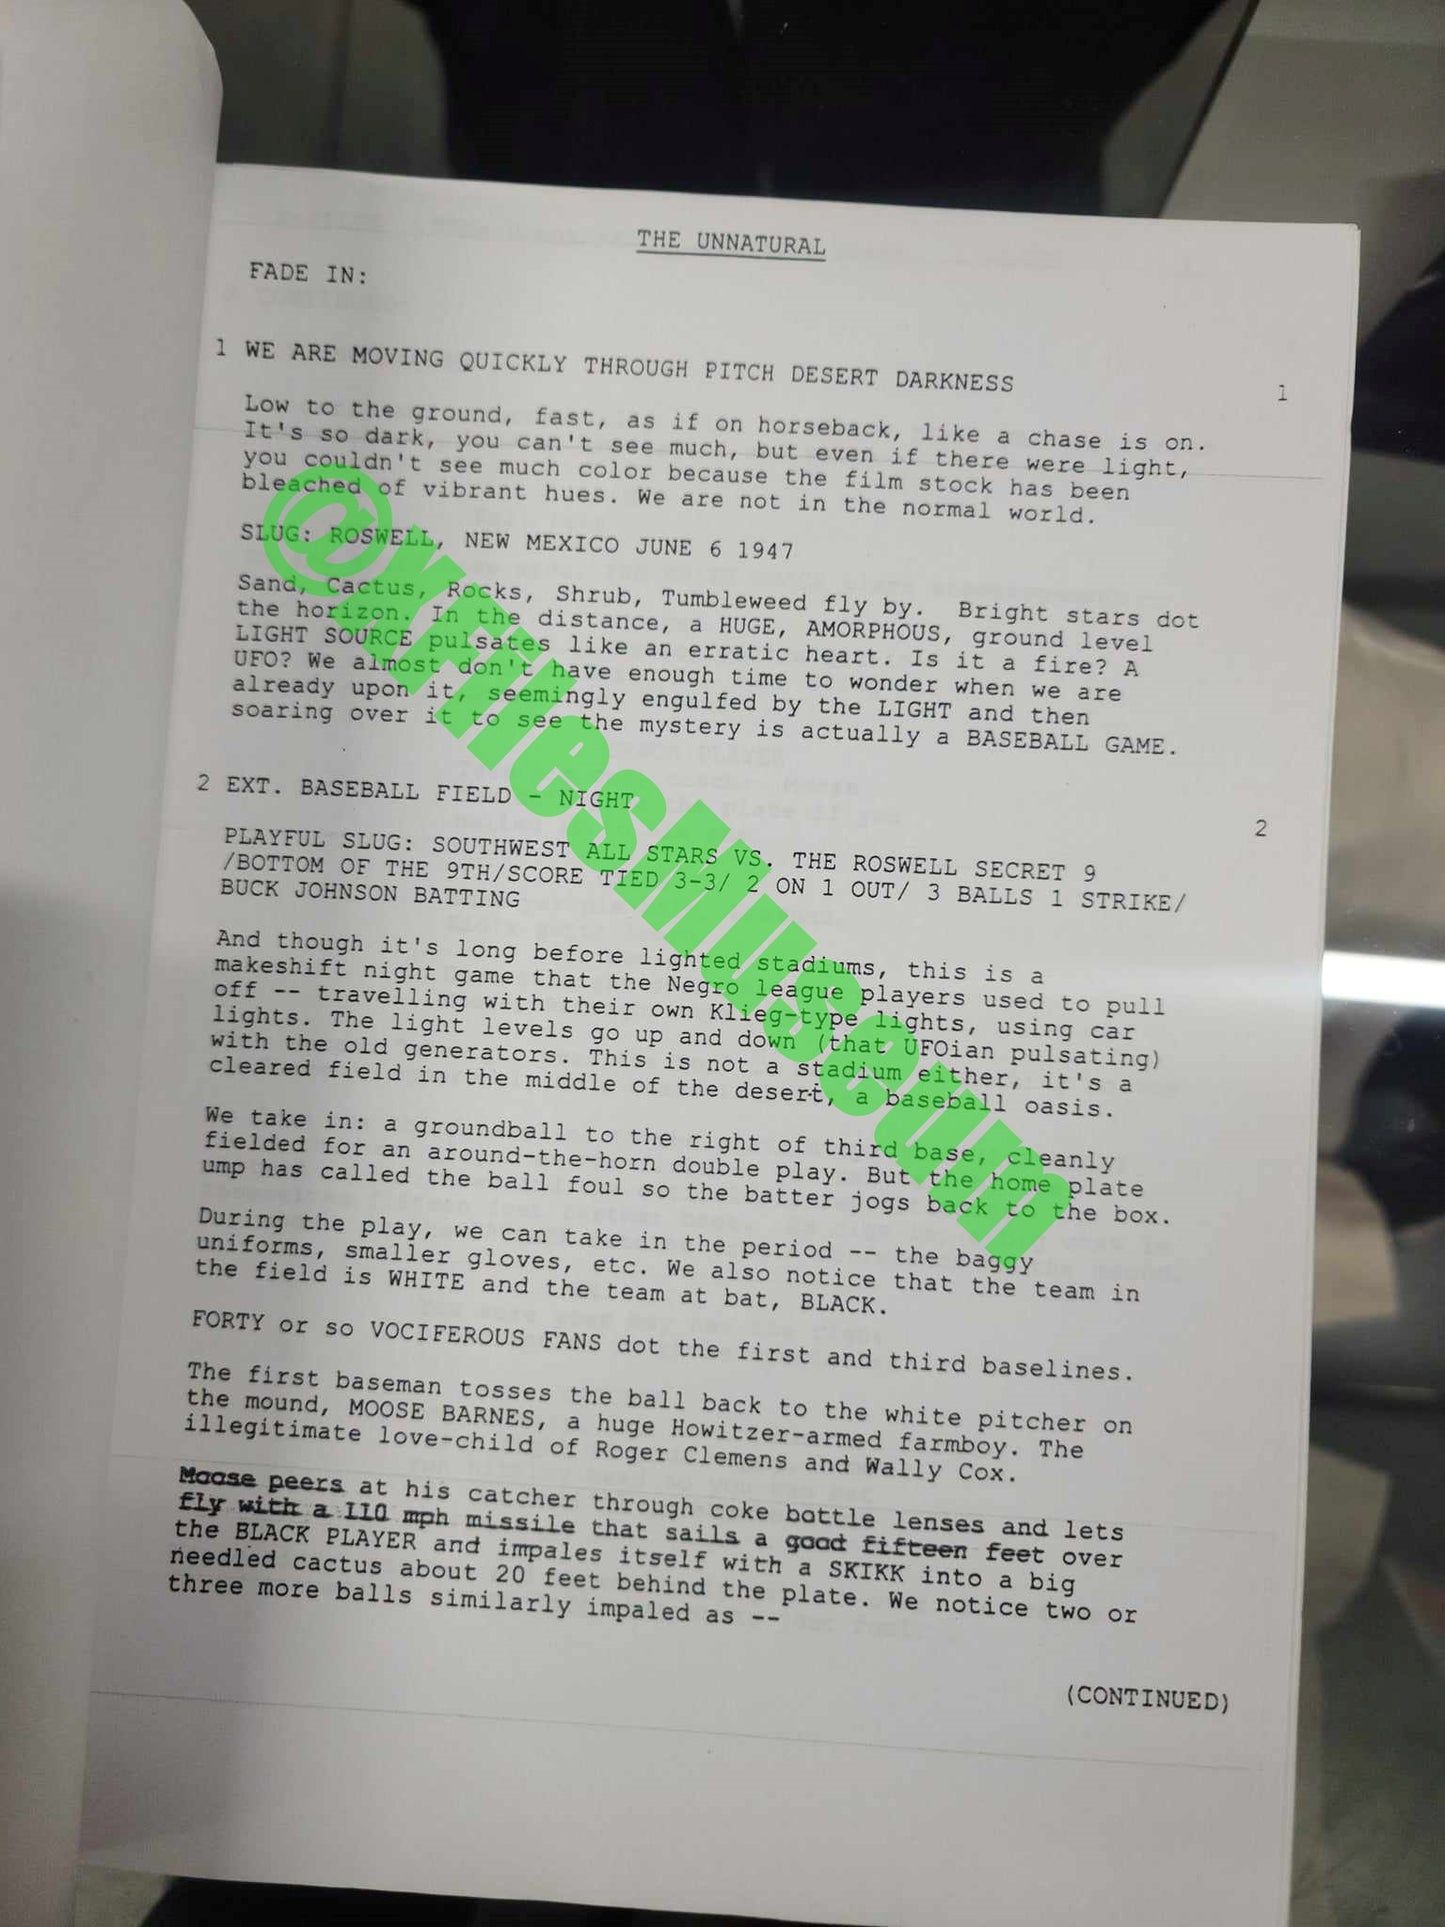 X Files Script -Episode "THE UNNATURAL" - Not Production Used